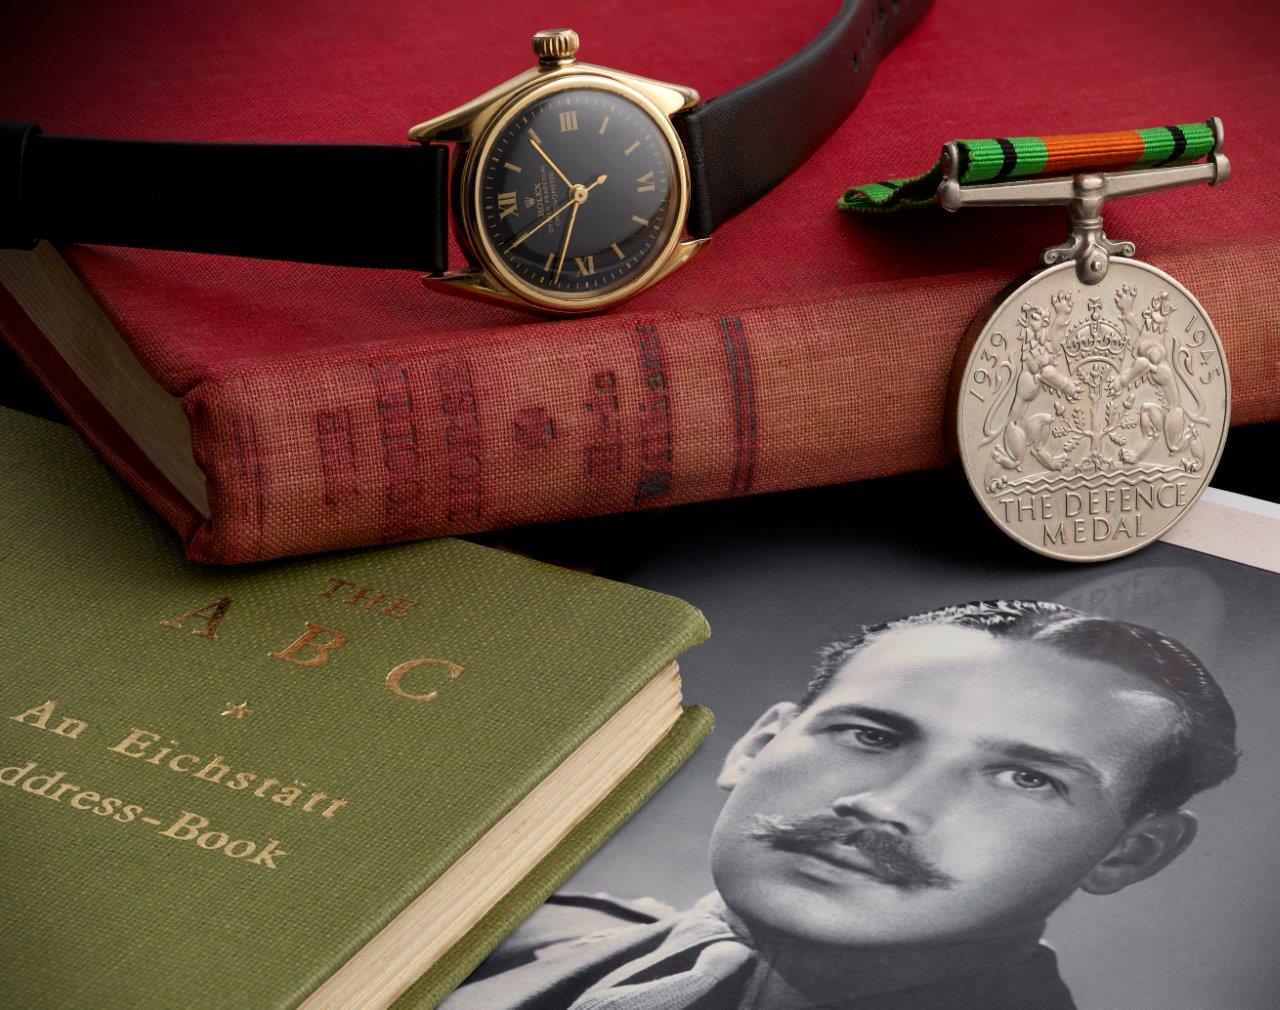 Picture of whitaker with rolex books and medals